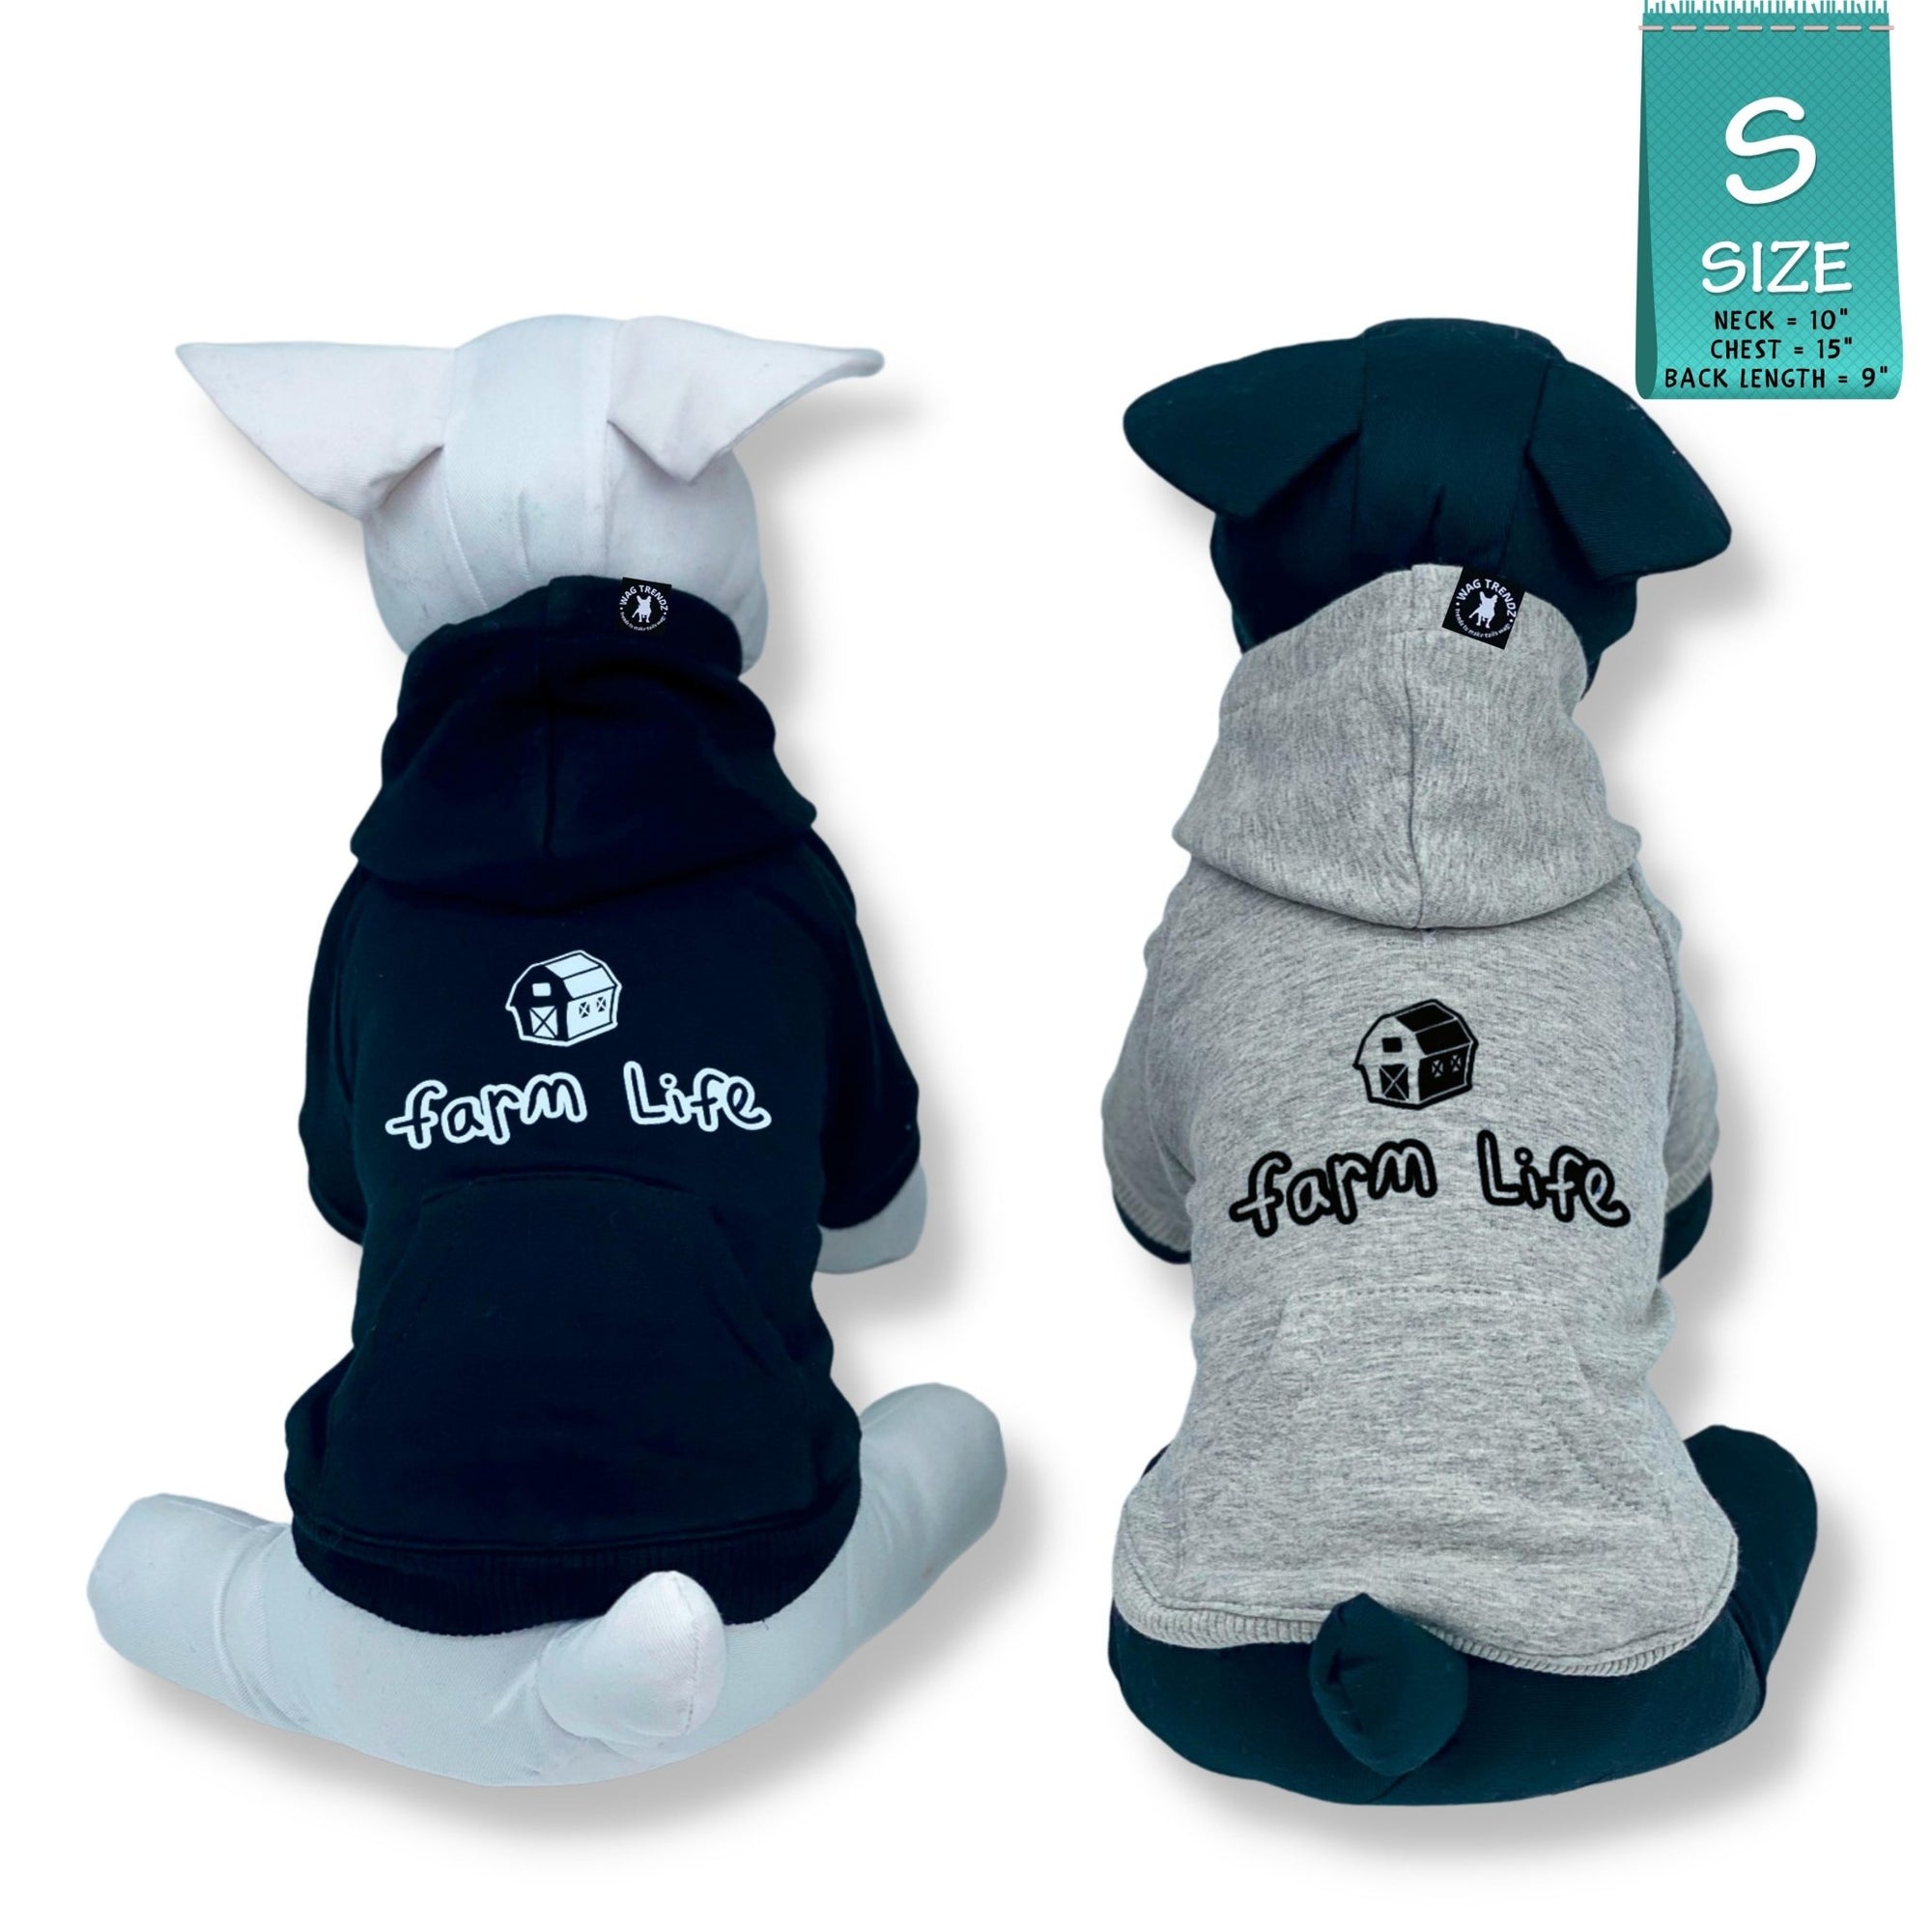 Dog Hoodie - Hoodies For Dogs - two stuffed dogs one white and one black wearing a &quot;Farm Life&quot; dog hoodie in black and gray - back view with Farm Life and a barn in black - against a solid white background - Wag Trendz